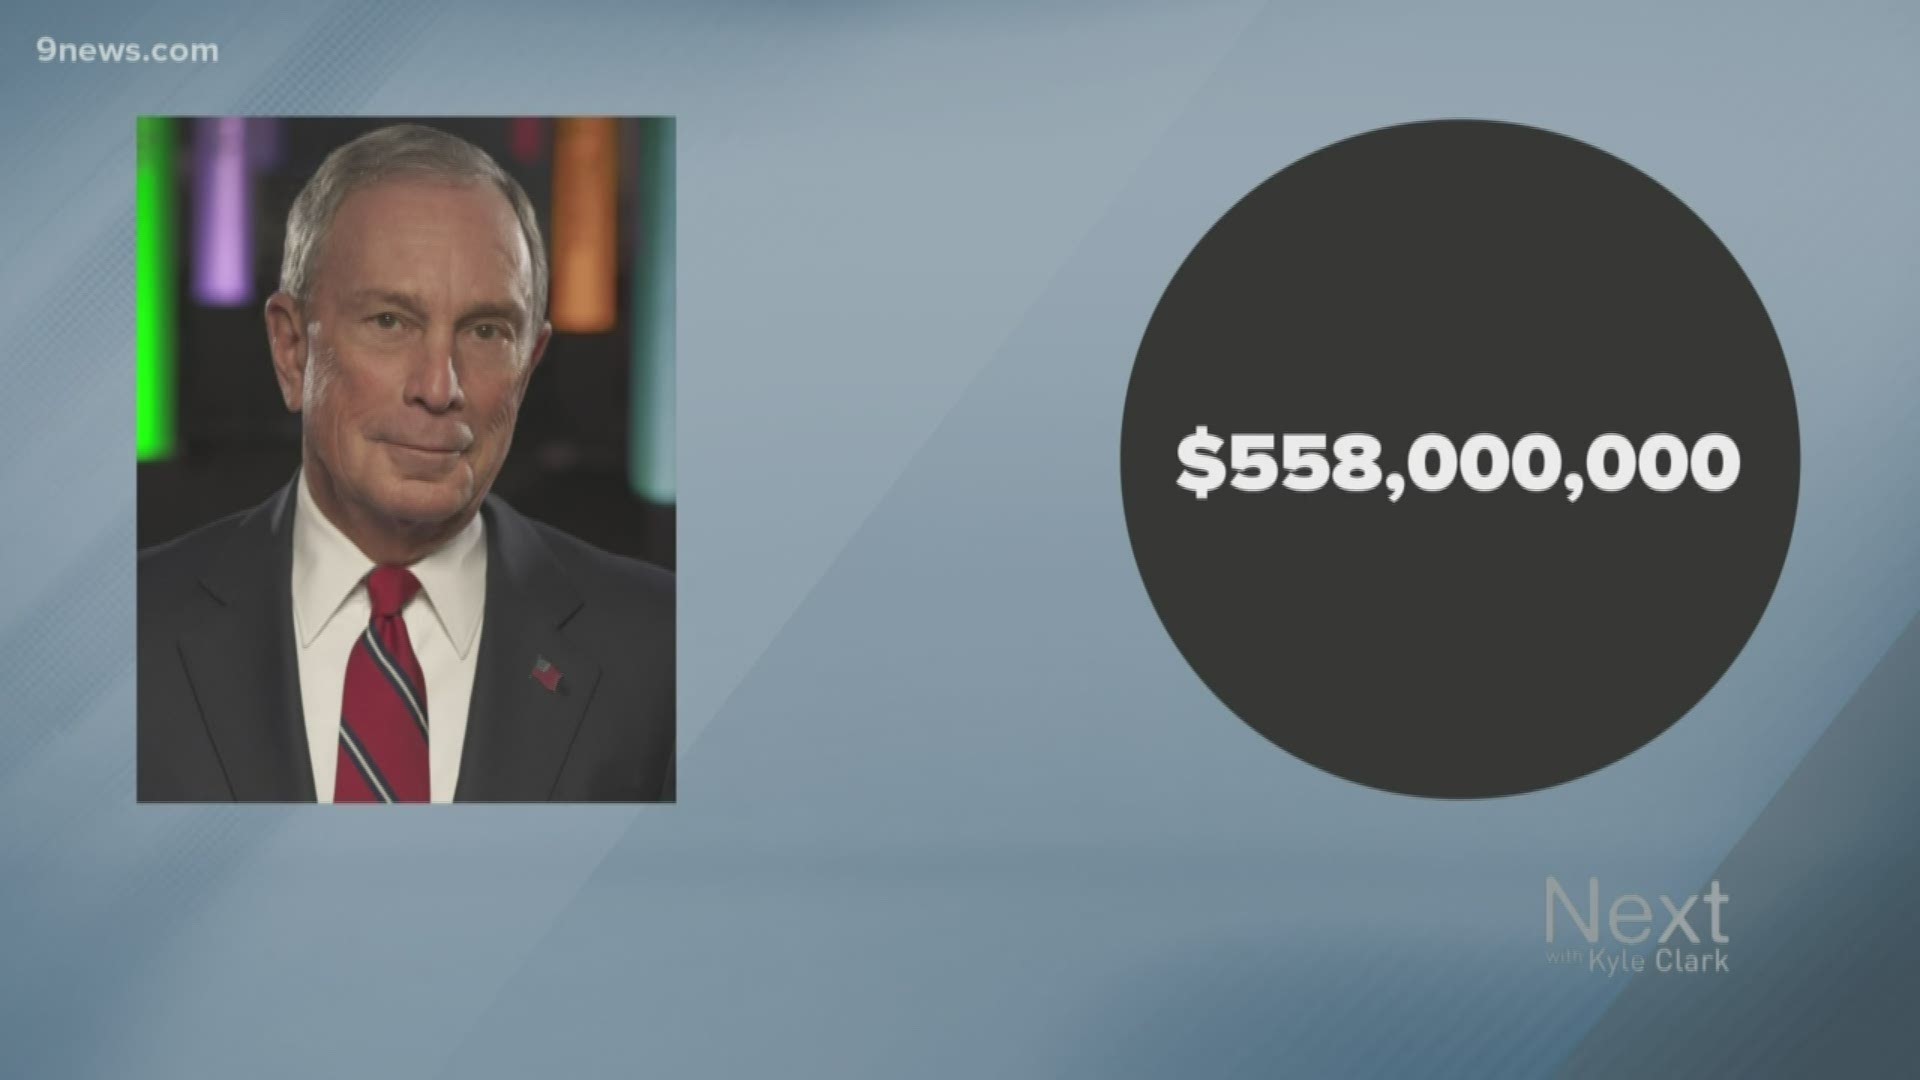 If Michael Bloomberg's got his mind on his money and his money on his mind...he doesn't have a lot to show for the $558 million he spent on advertising.